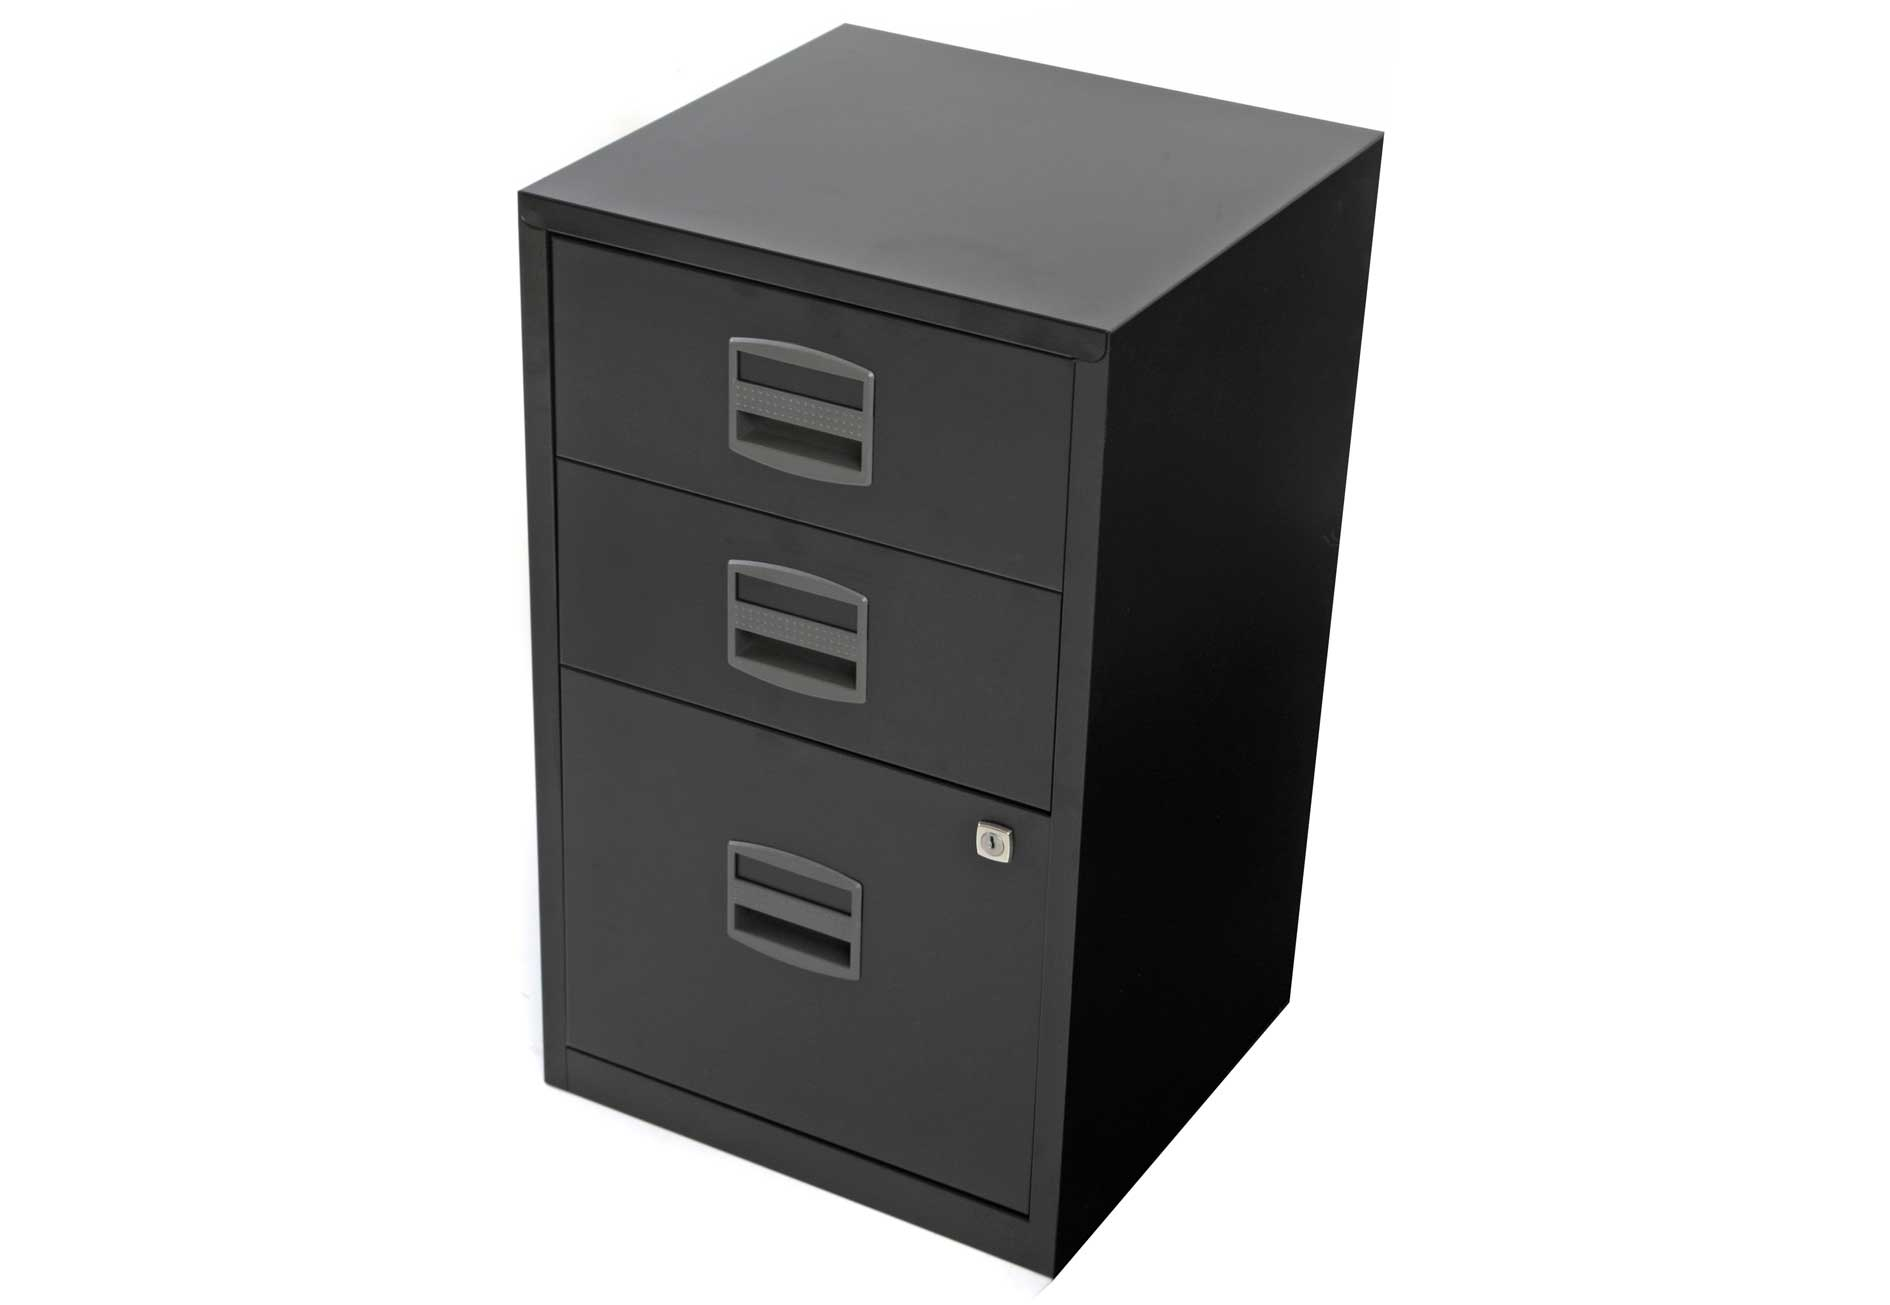 Furniture Office File Cabinet Drawers Furniture With Locking File intended for sizing 1890 X 1305